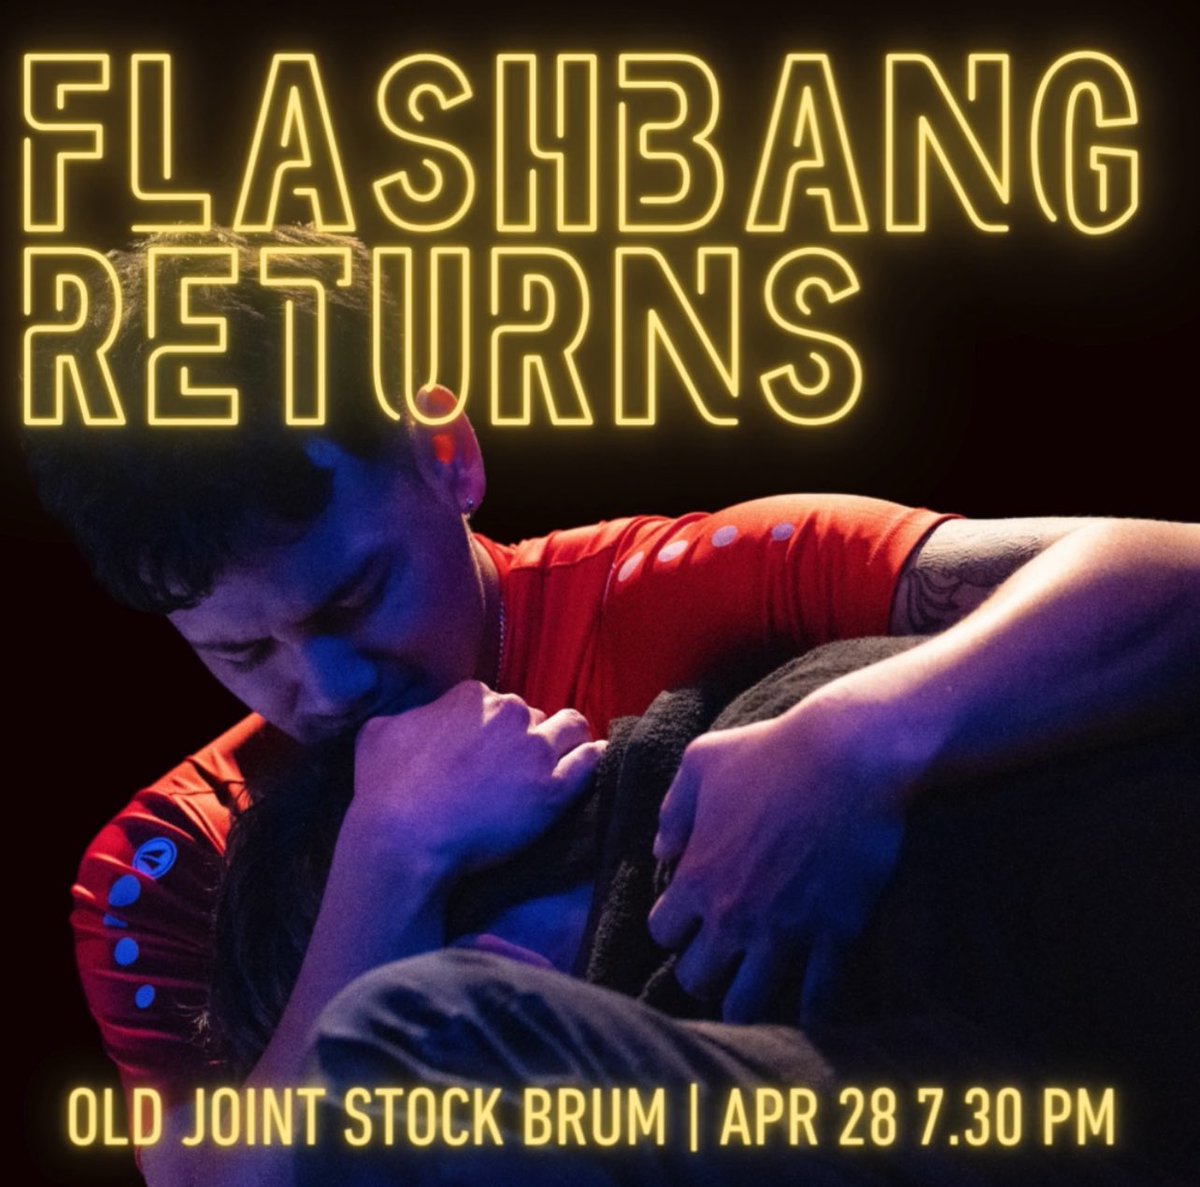 Not long now till we’re back with a bang! Double offie-nominated ⭐️⭐️⭐️⭐️⭐️ #Flashbang returns for 4 final shows: 💥 @LandUTheatre | Apr 28 💥 @LboroGrammar | May 1 💥 @OldJointStock | May 2 & 3 🎟️ For tickets and more info visit: linktr.ee/proforcatheatre